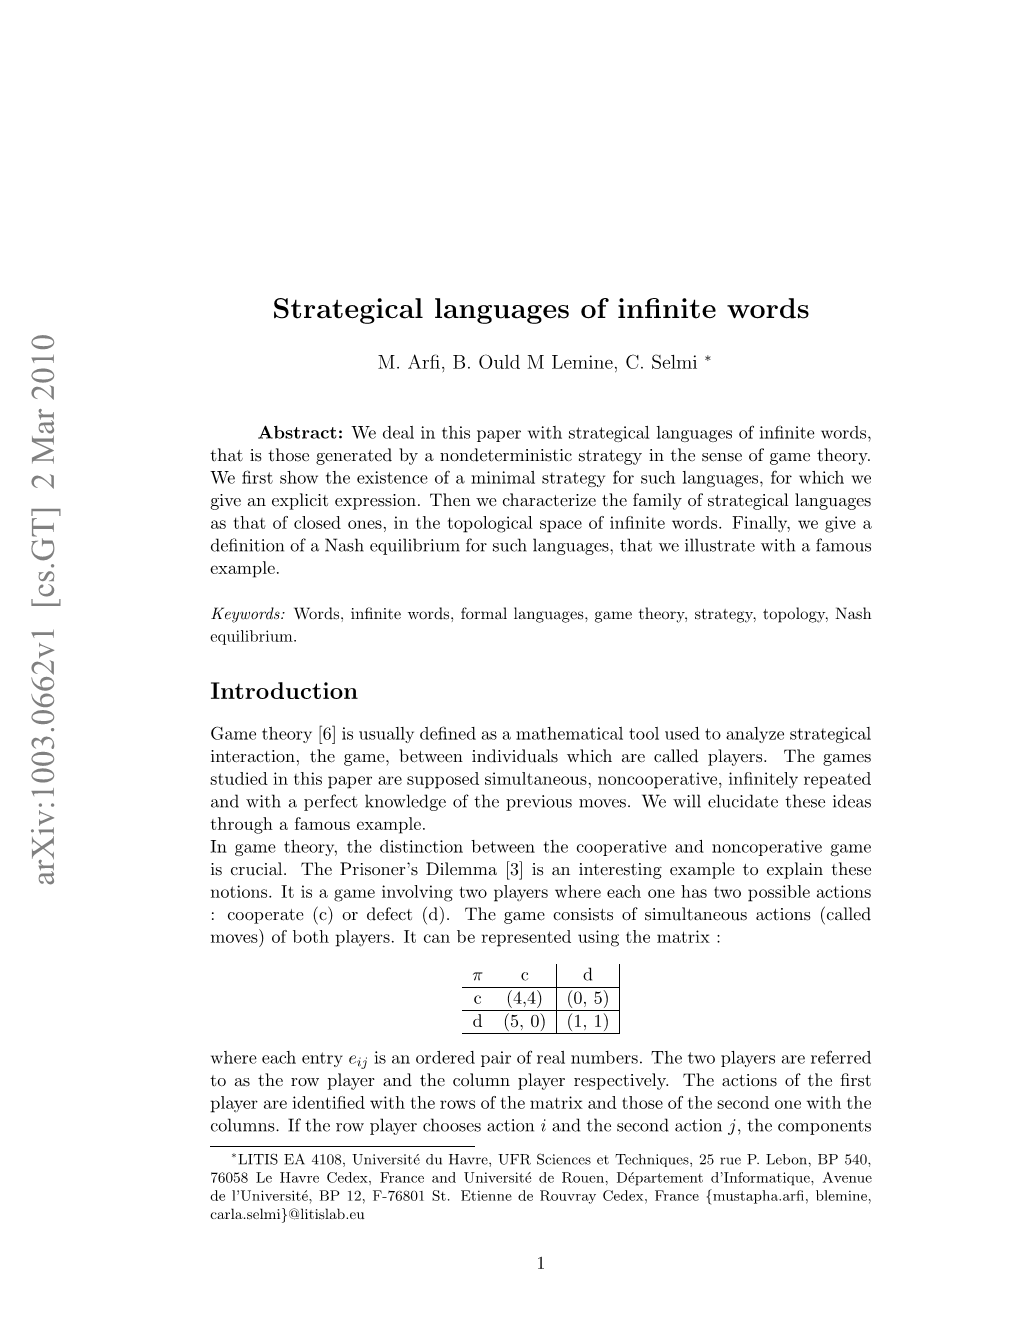 Strategical Languages of Infinite Words